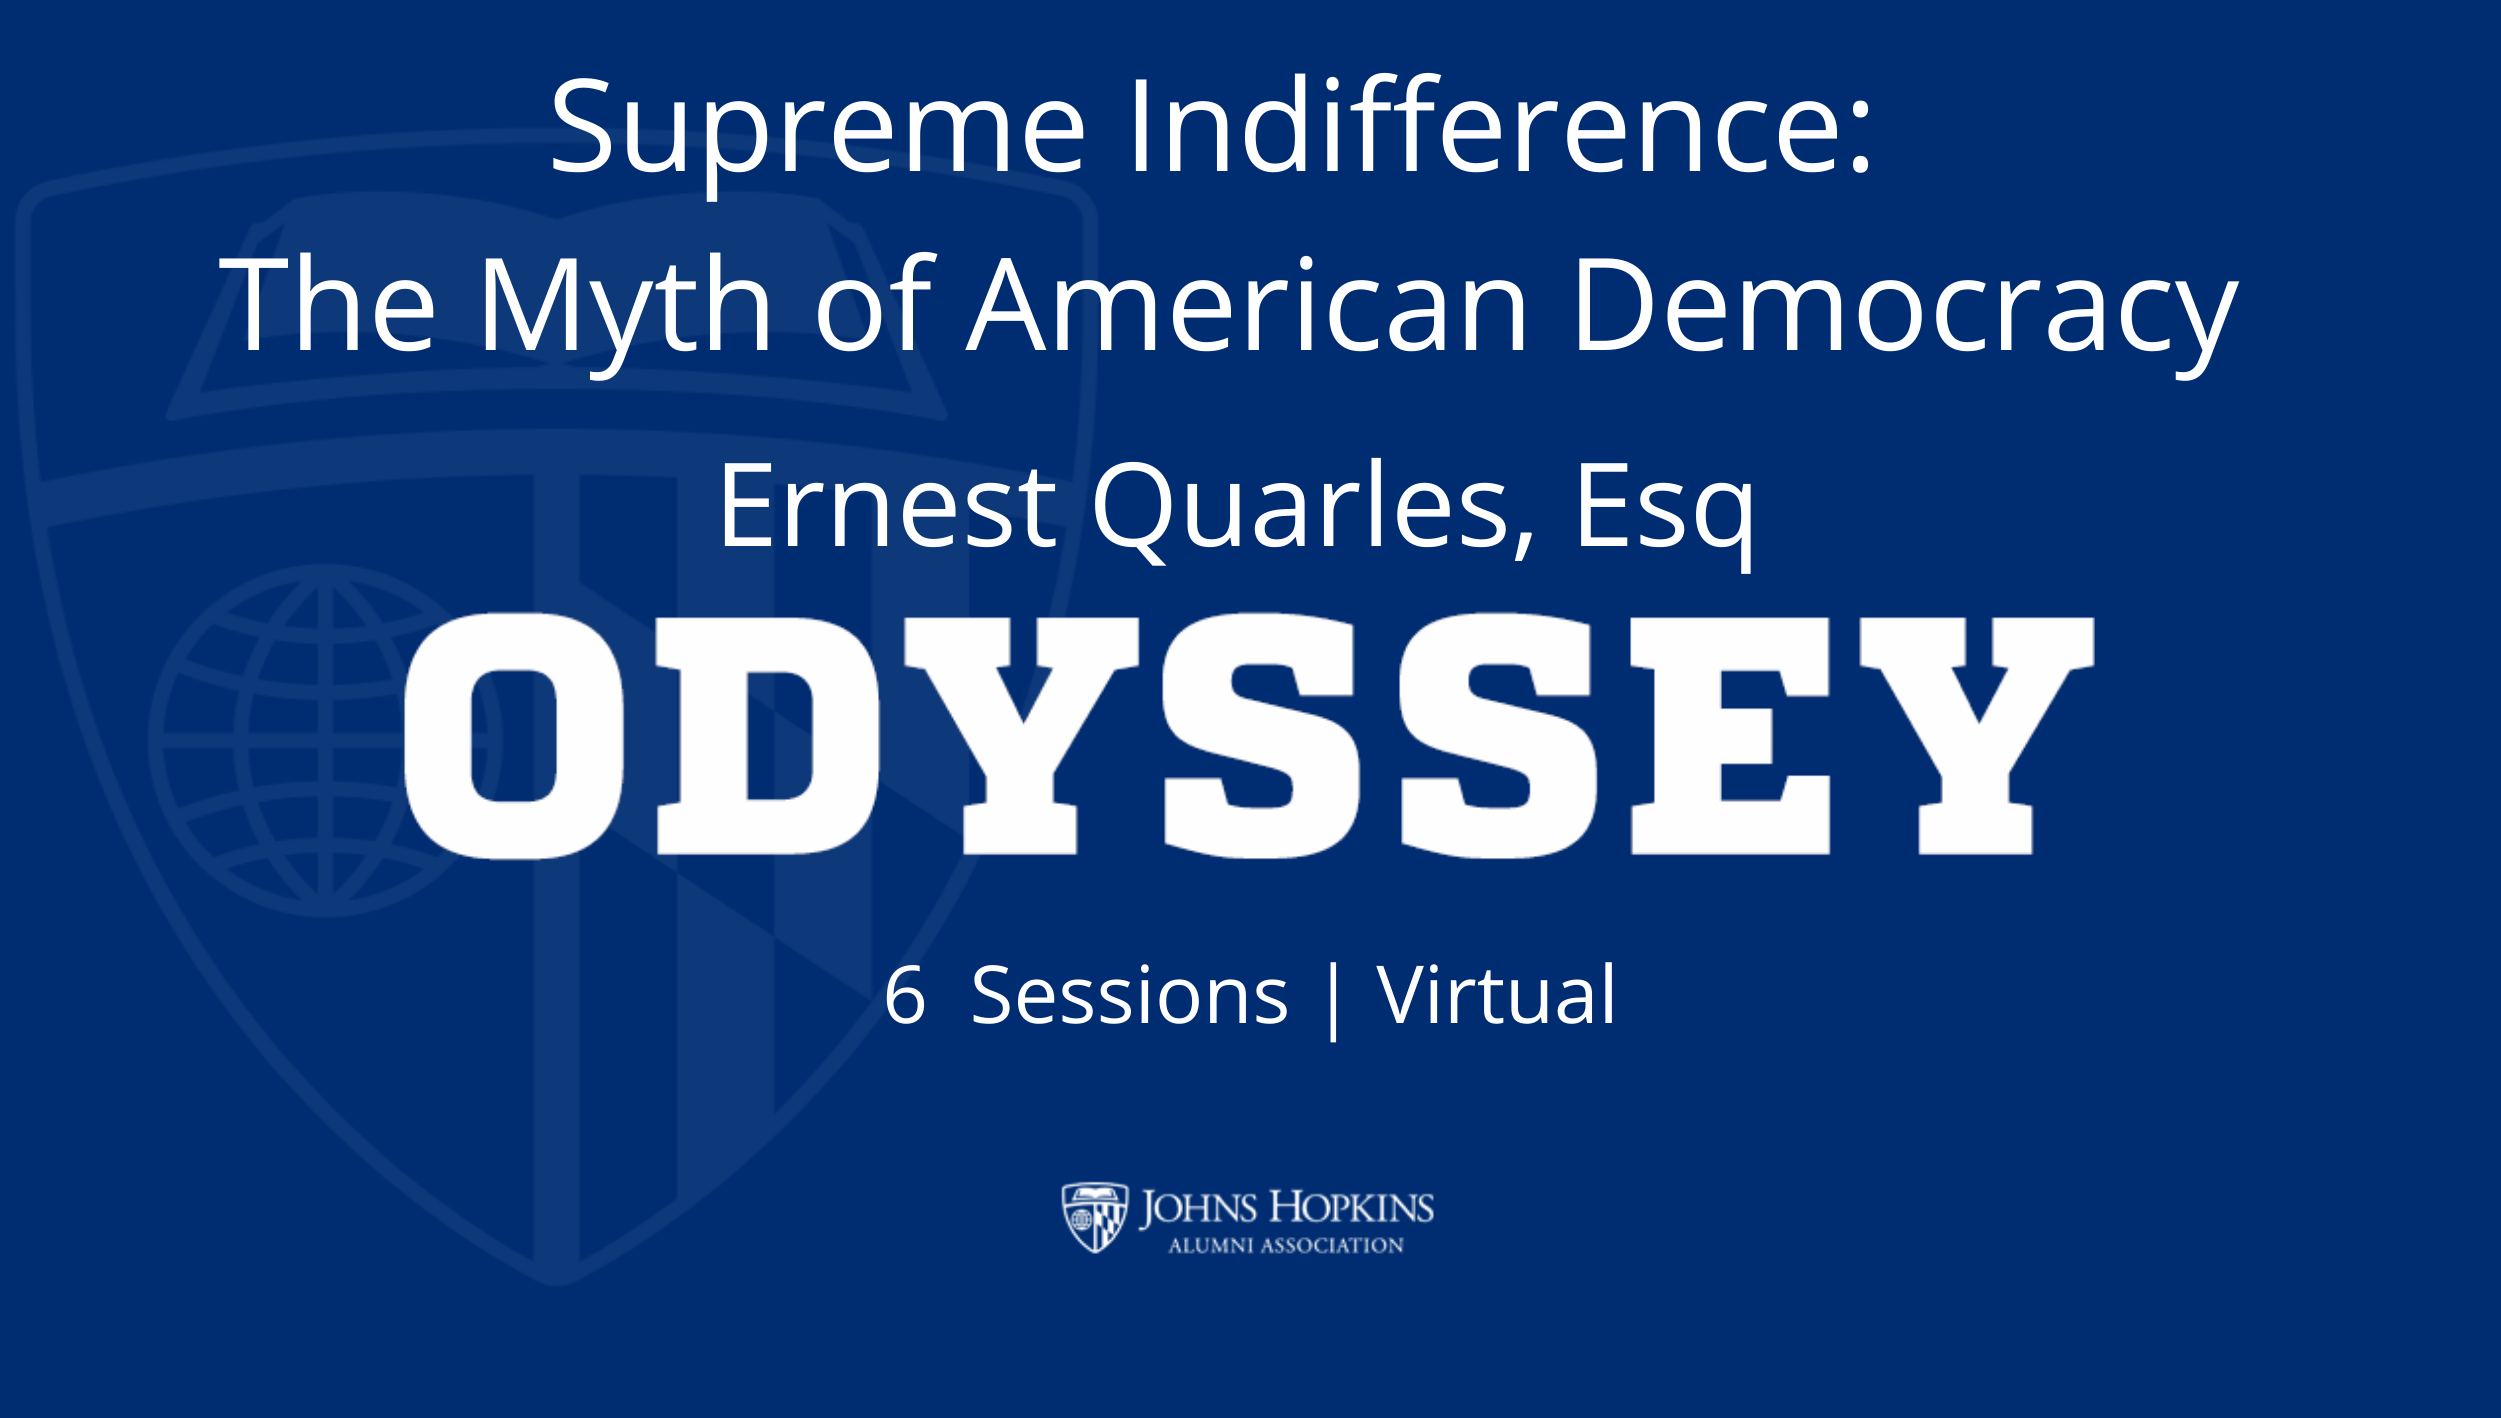 *New Start Date* 11/2/21-Supreme Indifference: The Myth of American Democracy 